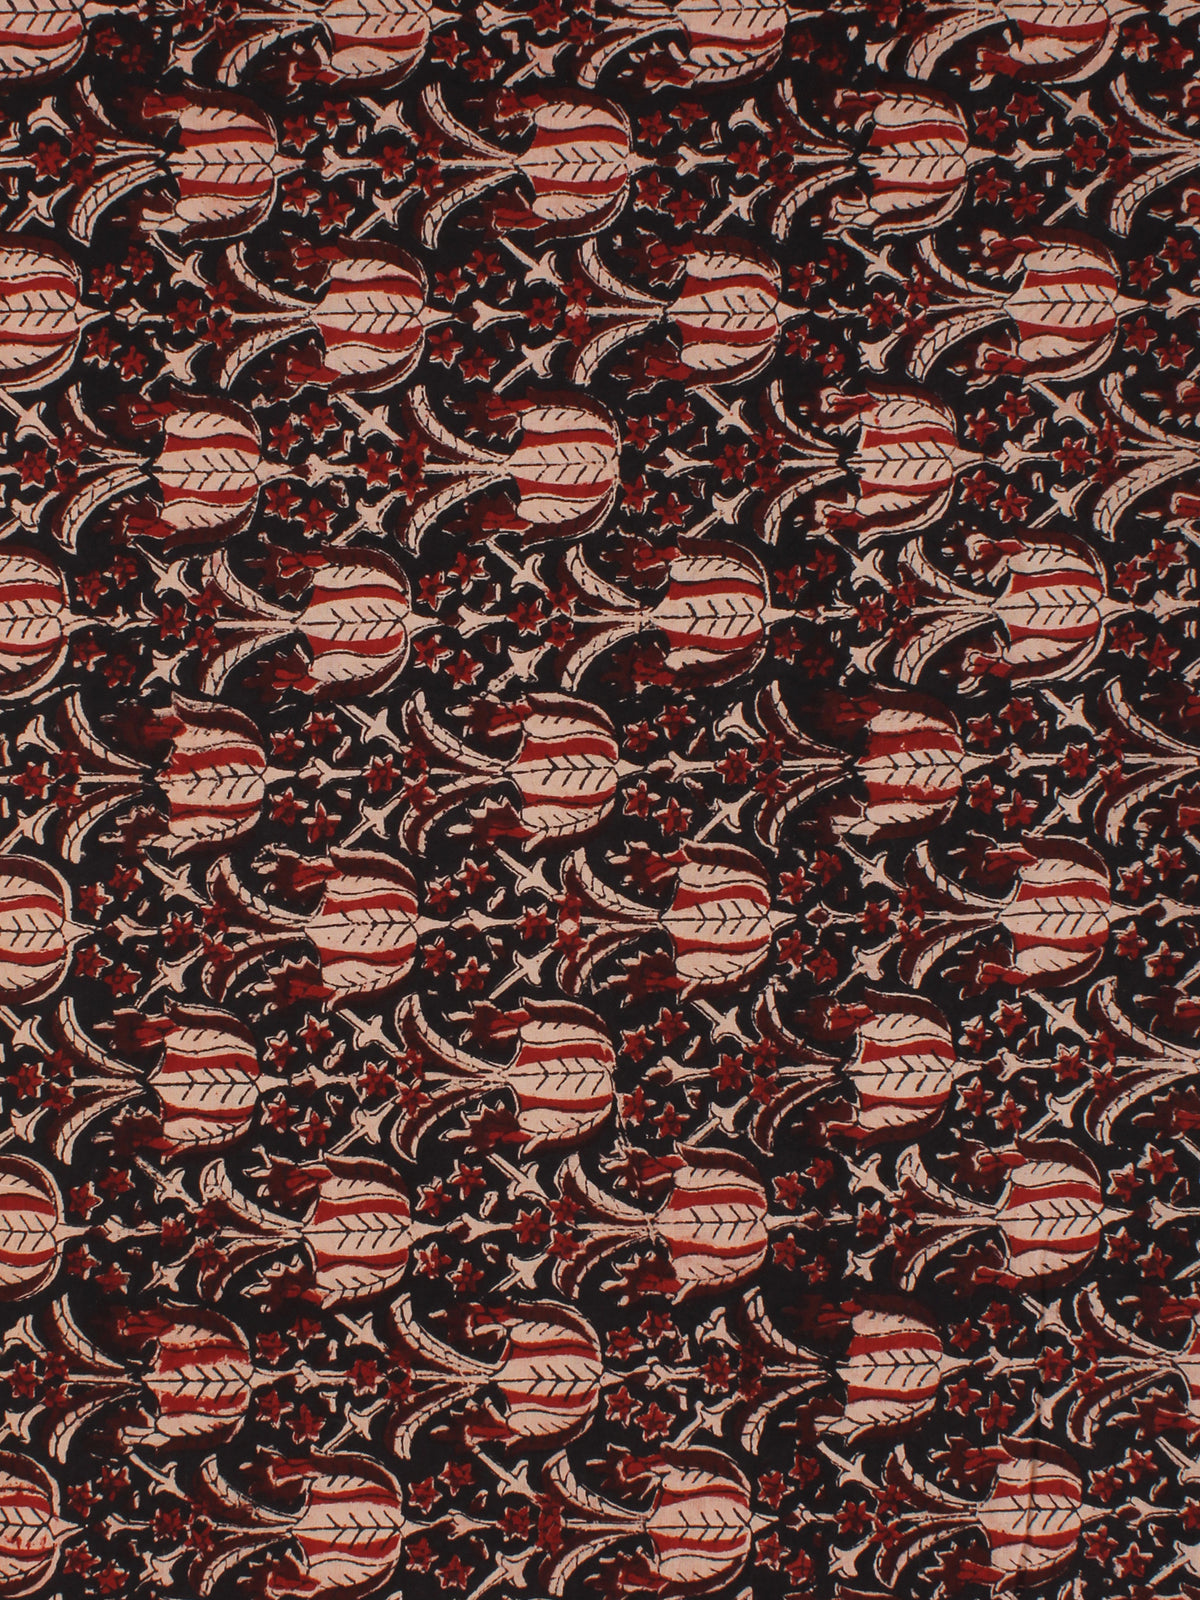 Black Red Ivory Hand Block Printed Cotton Fabric Per Meter - F001F2156